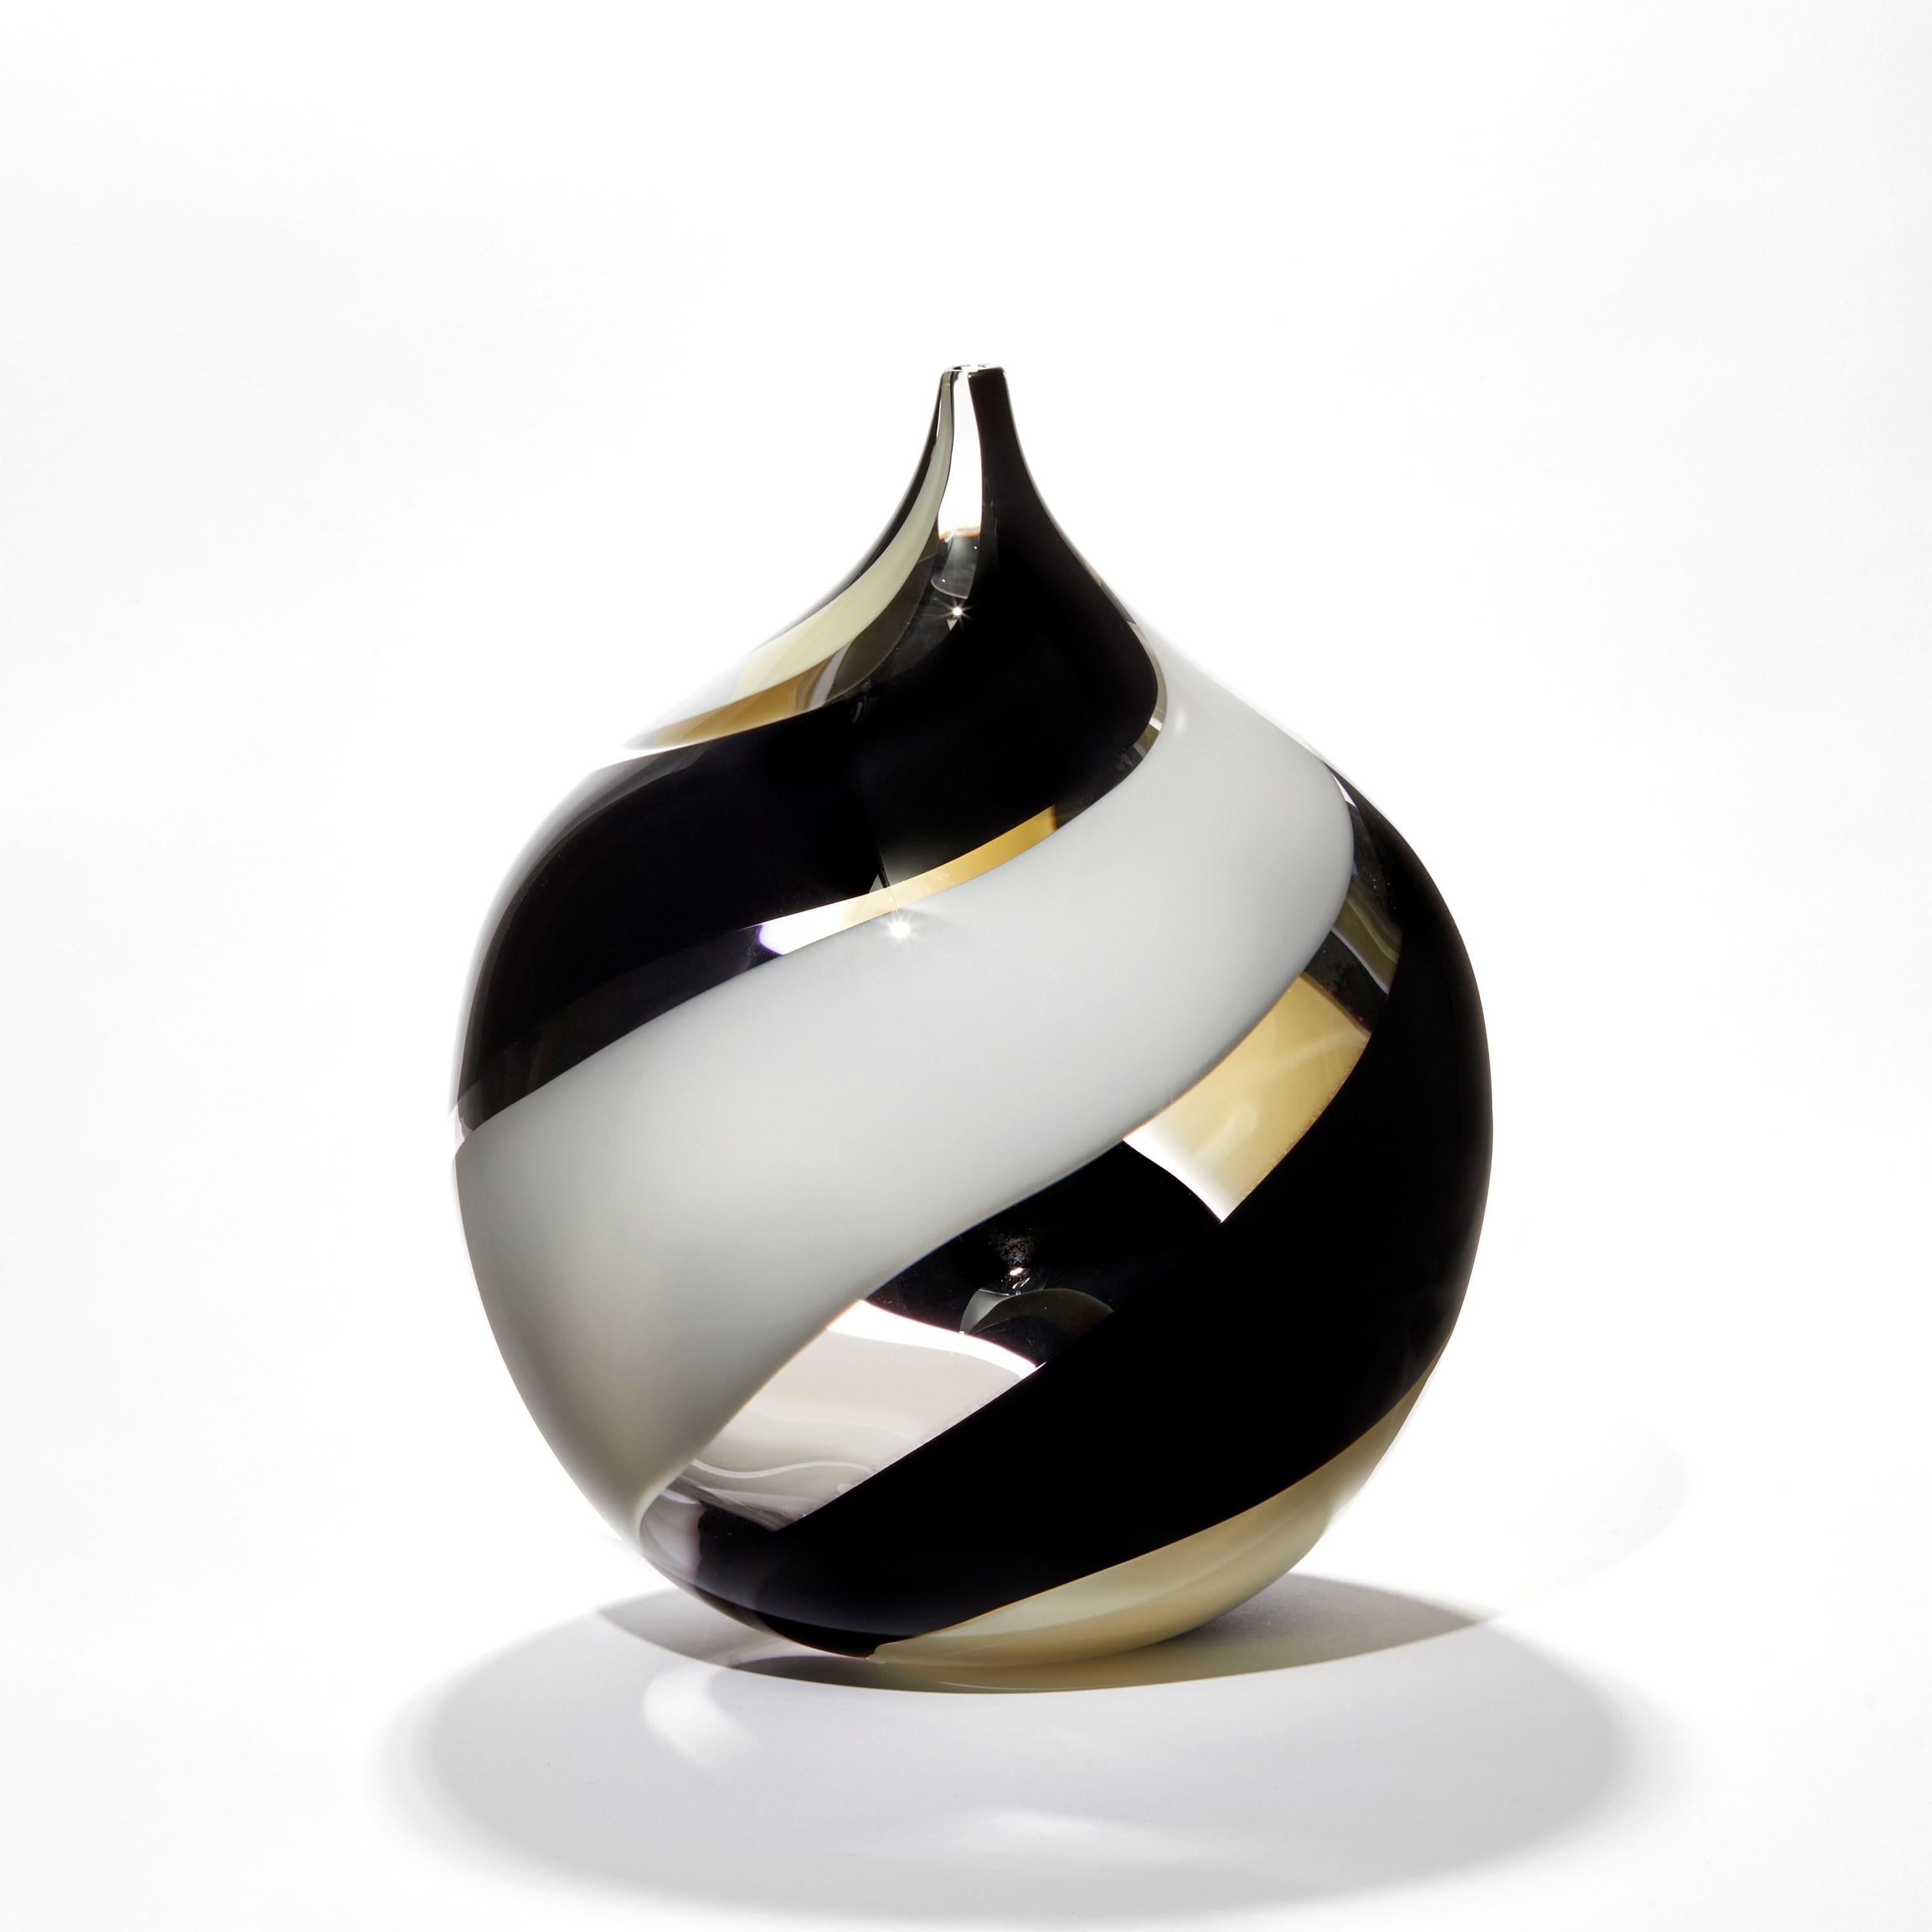 'Swirl' is a unique glass sculptural vessel by the Swedish artist, Gunnel Sahlin.

Sahlin’s current passions include exploring the limits of glass materiality, colour, form and light taking her inspiration from the natural world around her. Sahlin